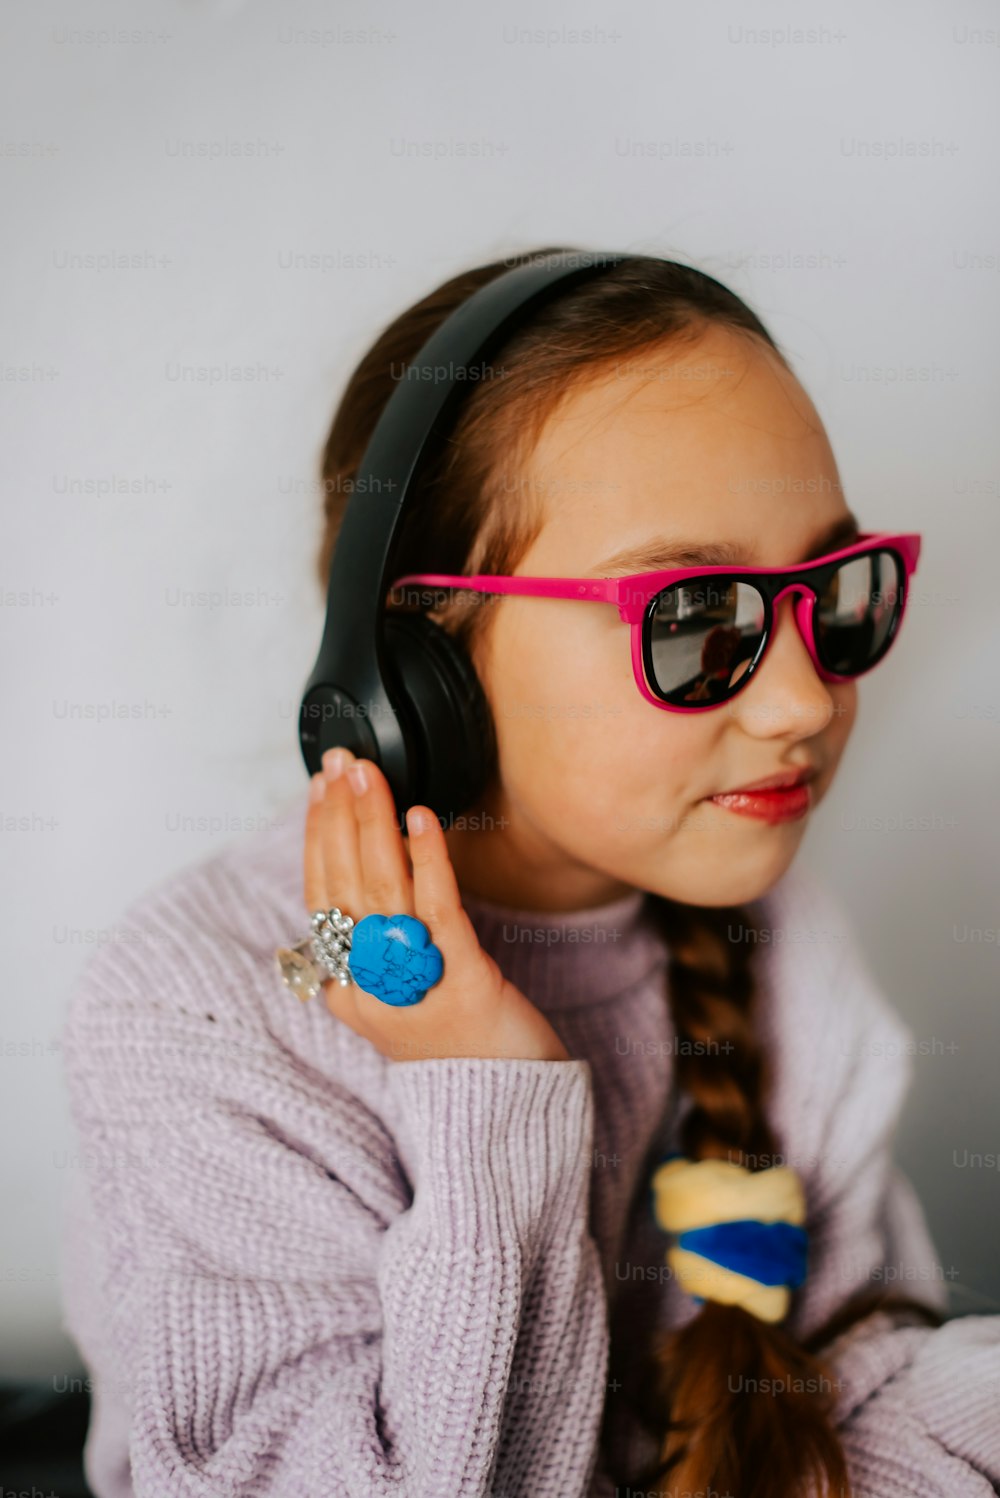 a little girl wearing headphones and sunglasses